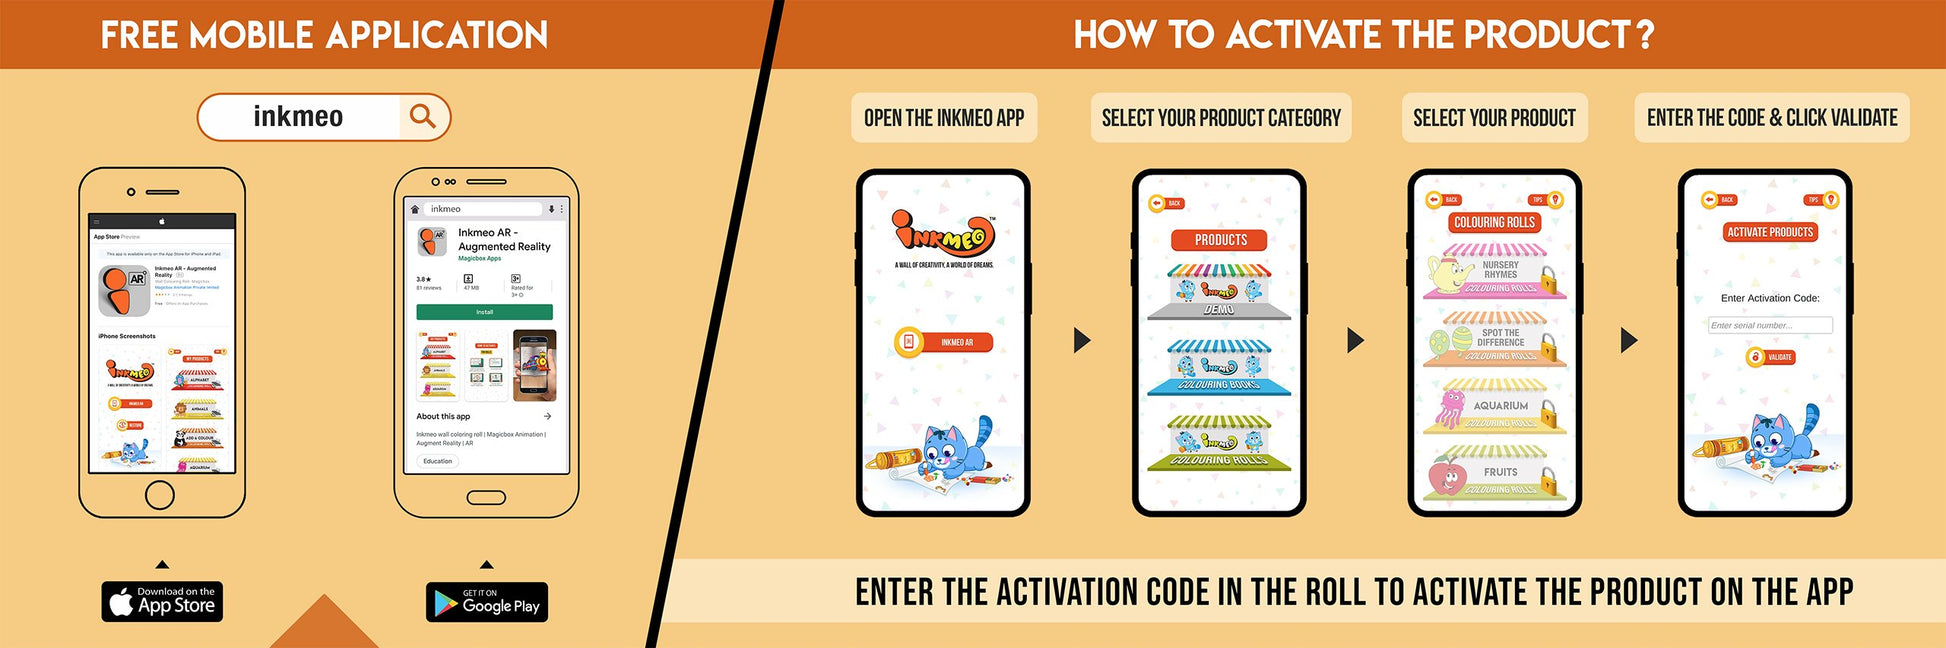 The image has an orange background which is divided into two parts. The first part shows a free mobile application for downloading the Inkmeo app in the App Store and Google Store. The second part shows four mobile phones with the caption "To open the Inkmeo app, select your product category, select your product, and enter the code & click validate.